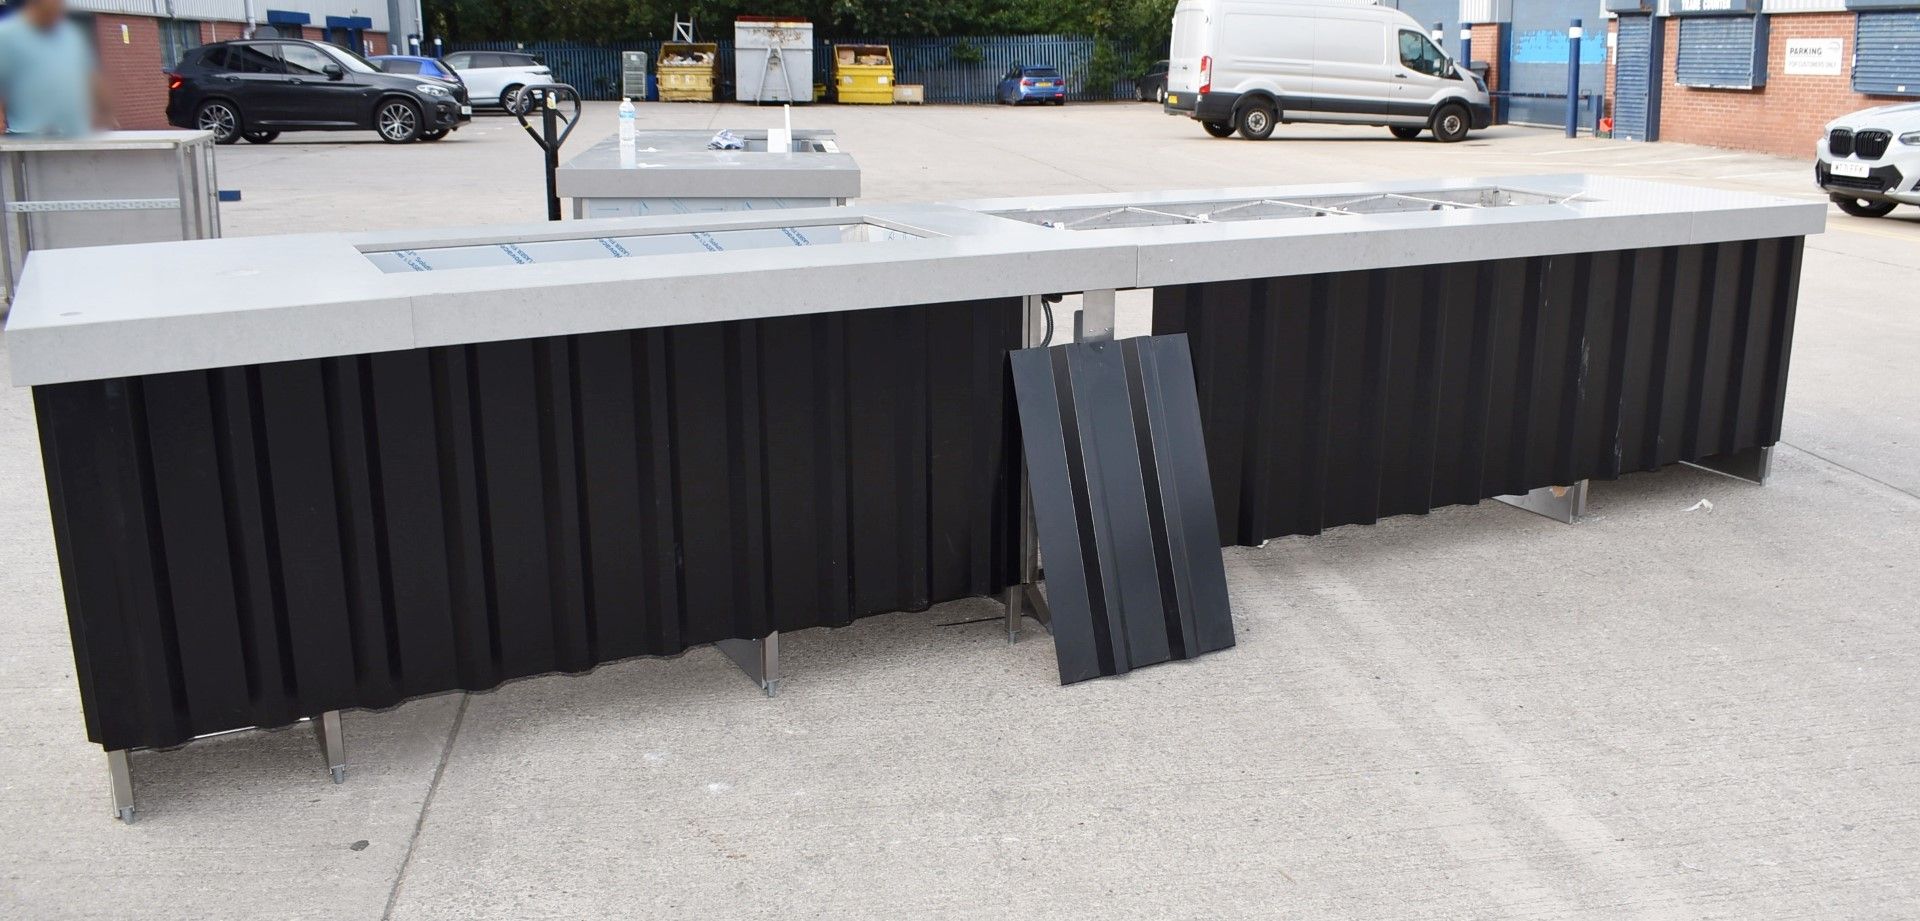 1 x Bespoke Retail Food Counter Featuring Black Wall Cladding Fascia, Granite Worktop, Cold Well, - Image 15 of 51